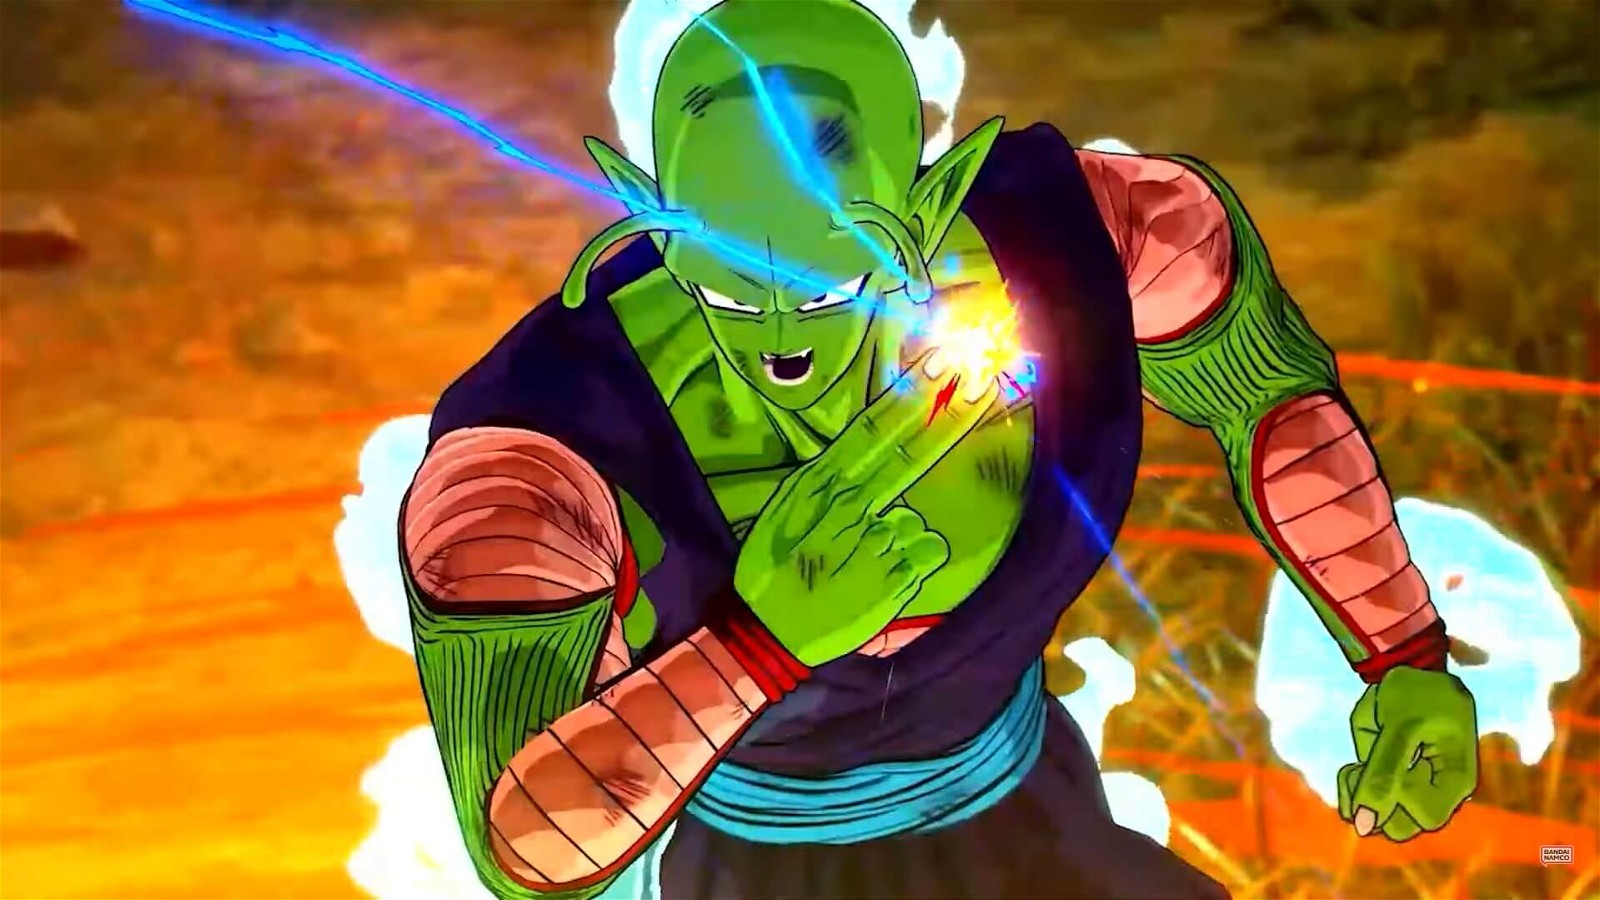 Piccolo is about to use the Special Beam Cannon in Dragon Ball: Sparking Zero. Credits: Bandai Namco